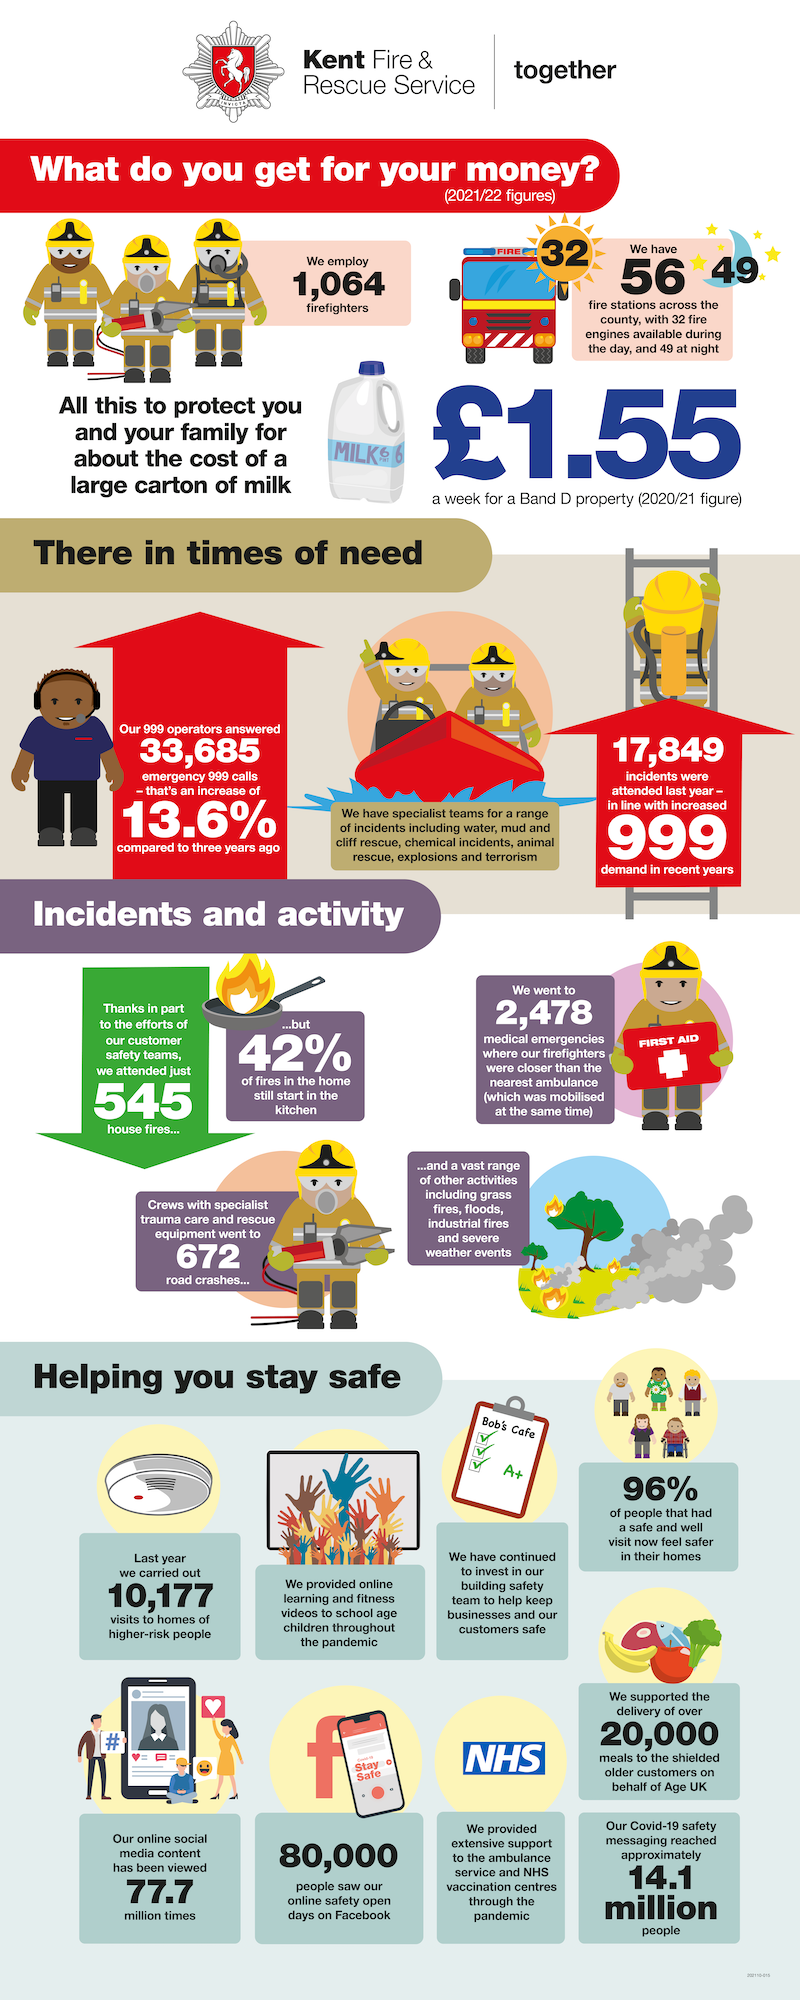 infogrphic for the Safety and Wellbeing Plan consultation